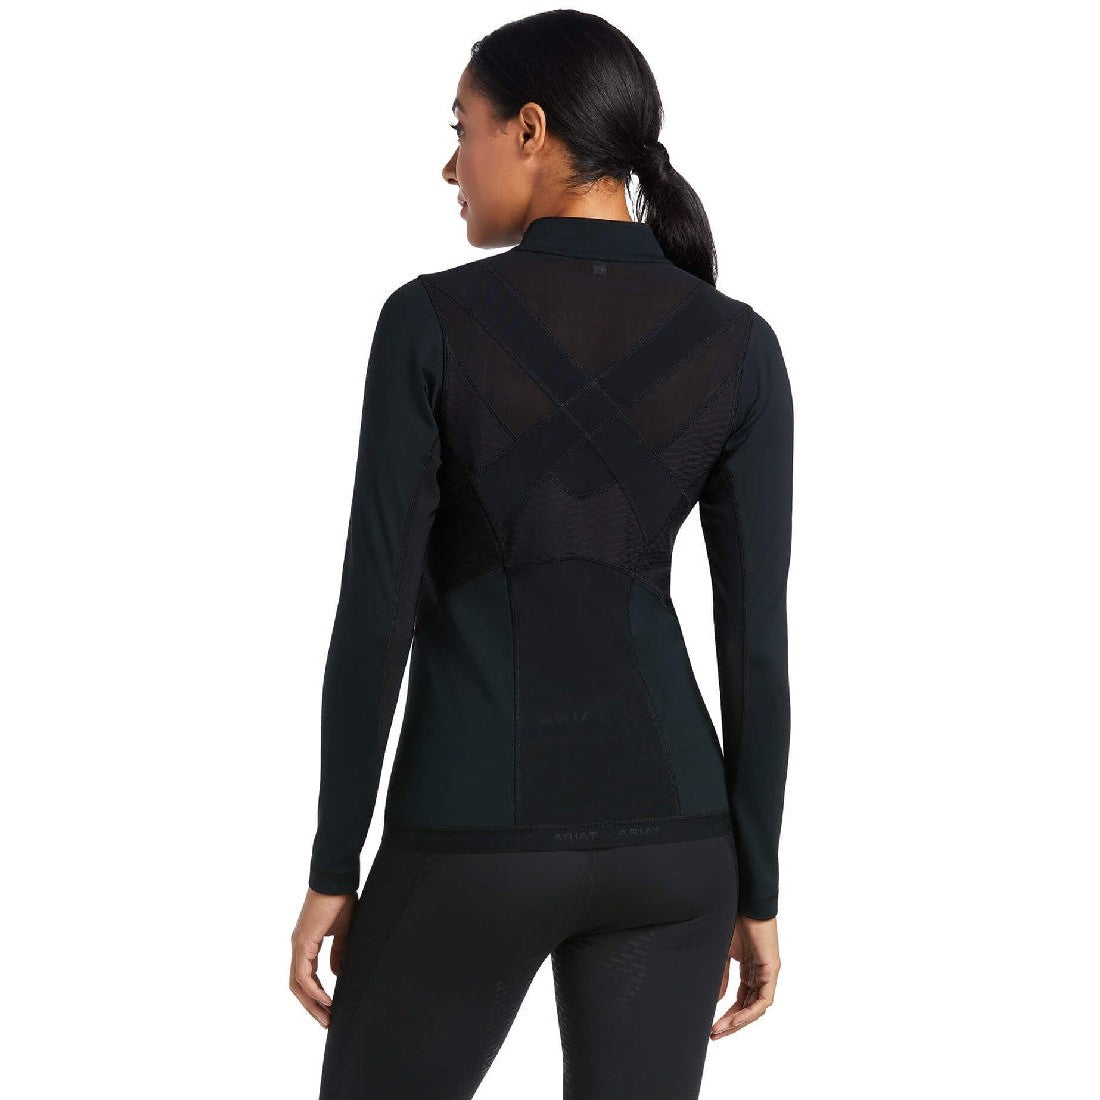 Baselayer Ariat Ascent Long Sleeve Black Ladies-Ascot Saddlery-The Equestrian